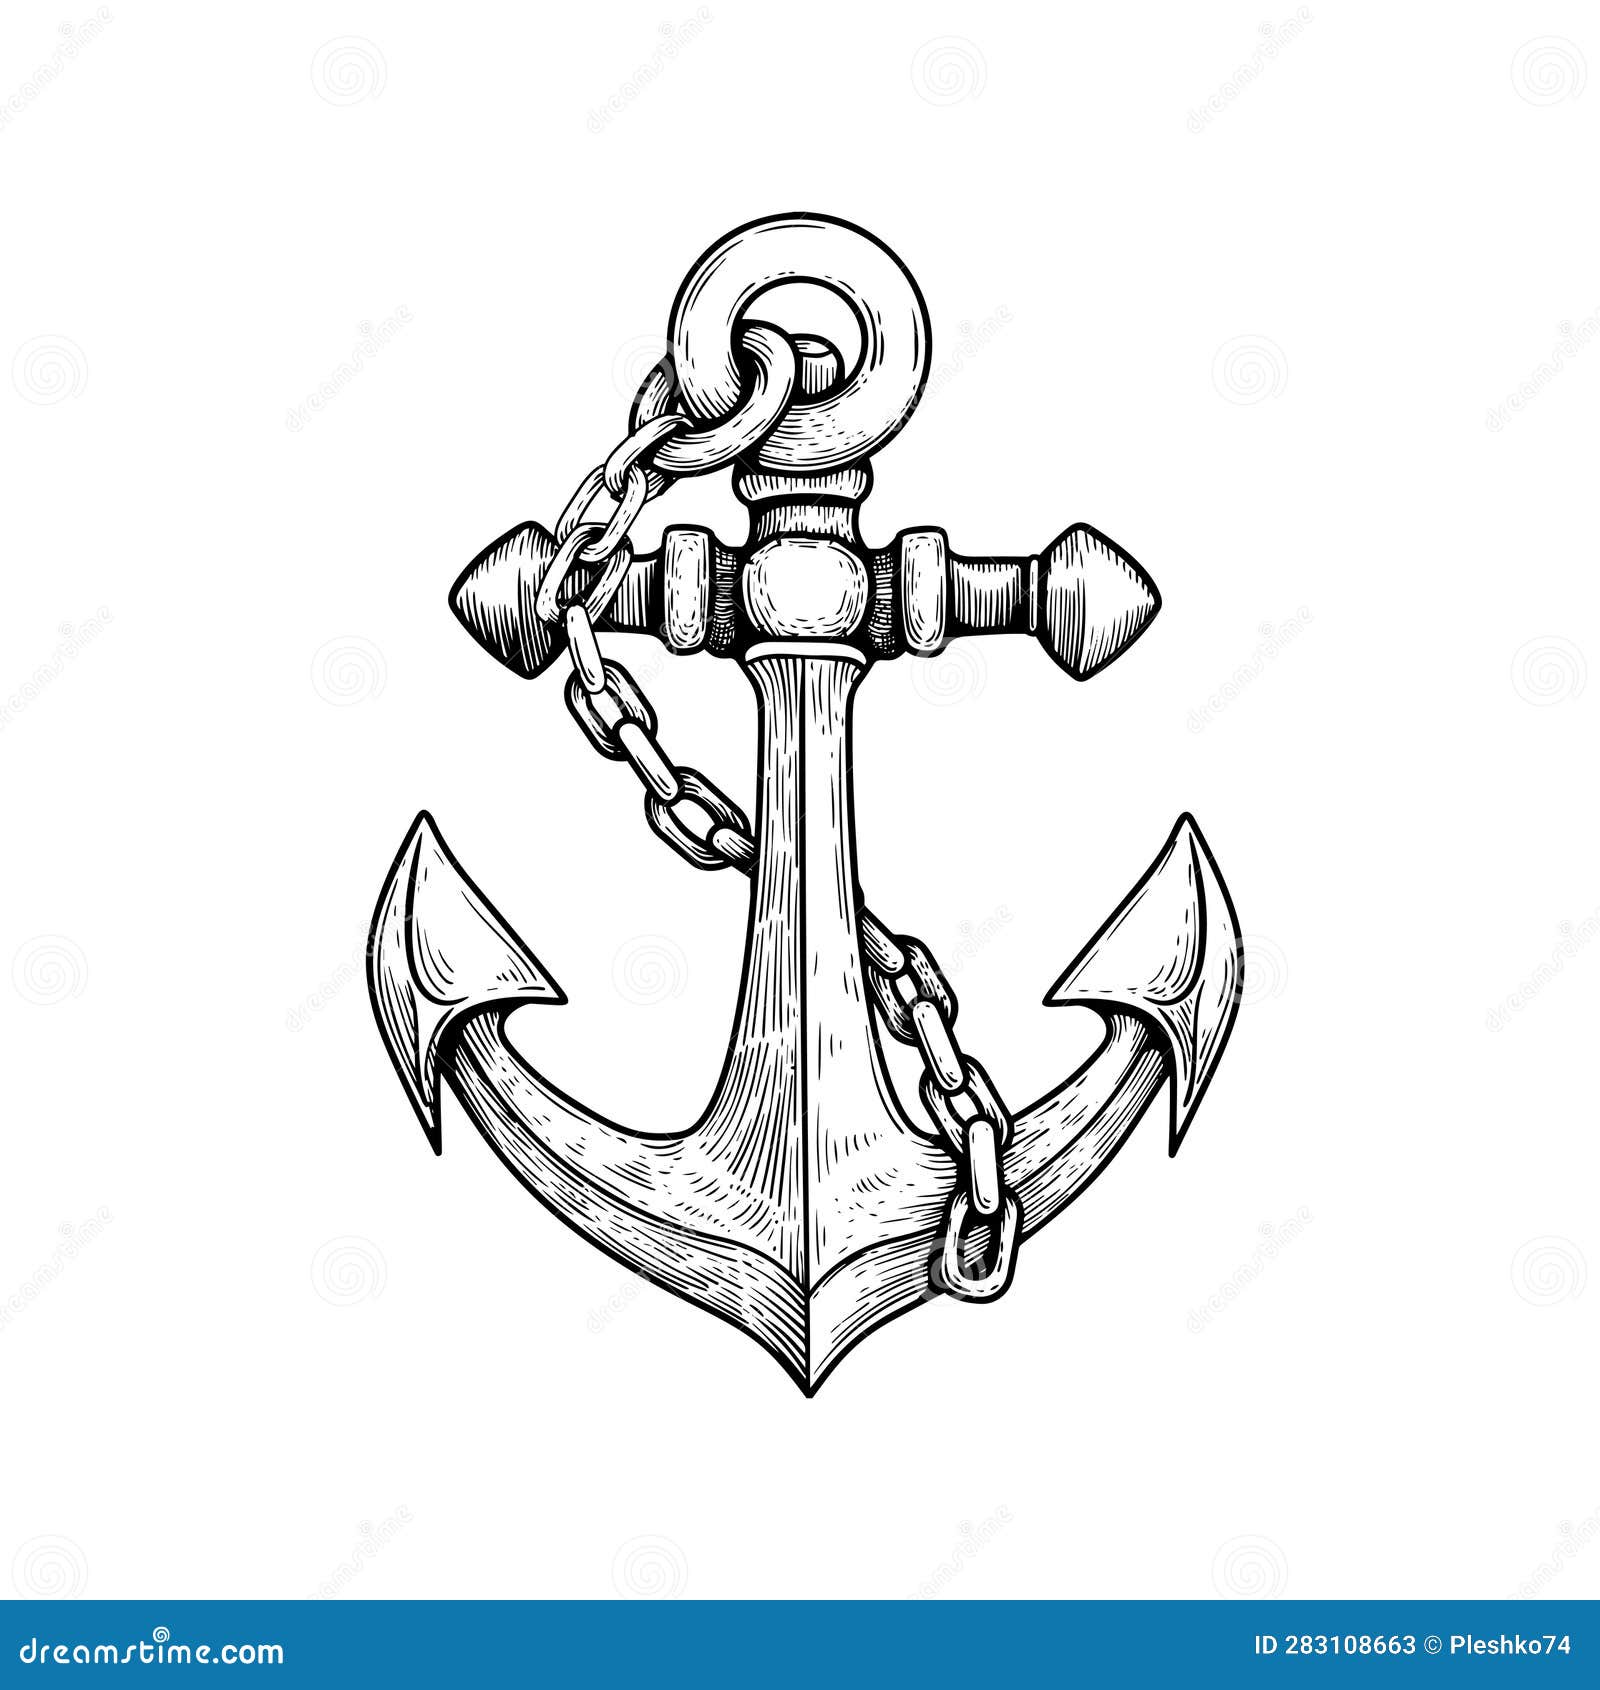 Sea Anchor with Chain. Ship Equipment in Sketch Hand Drawn Style. Best ...